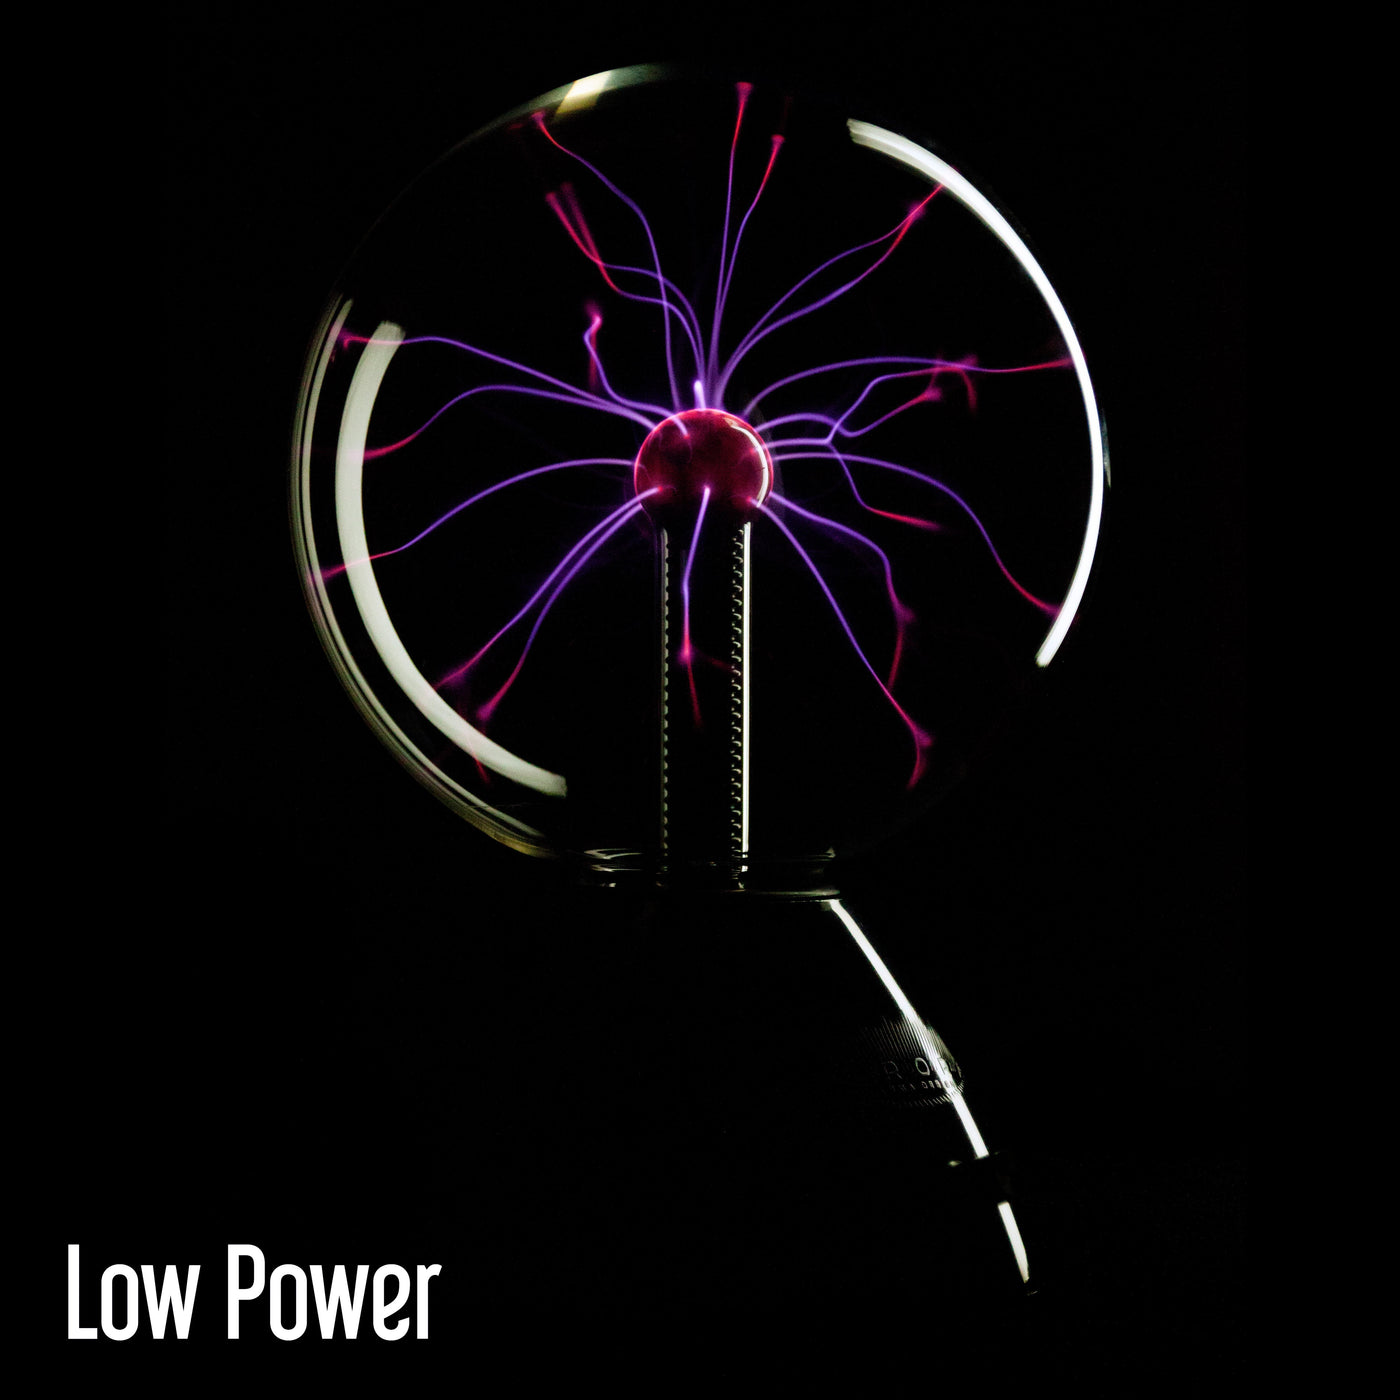 How Does a Plasma Ball Work?